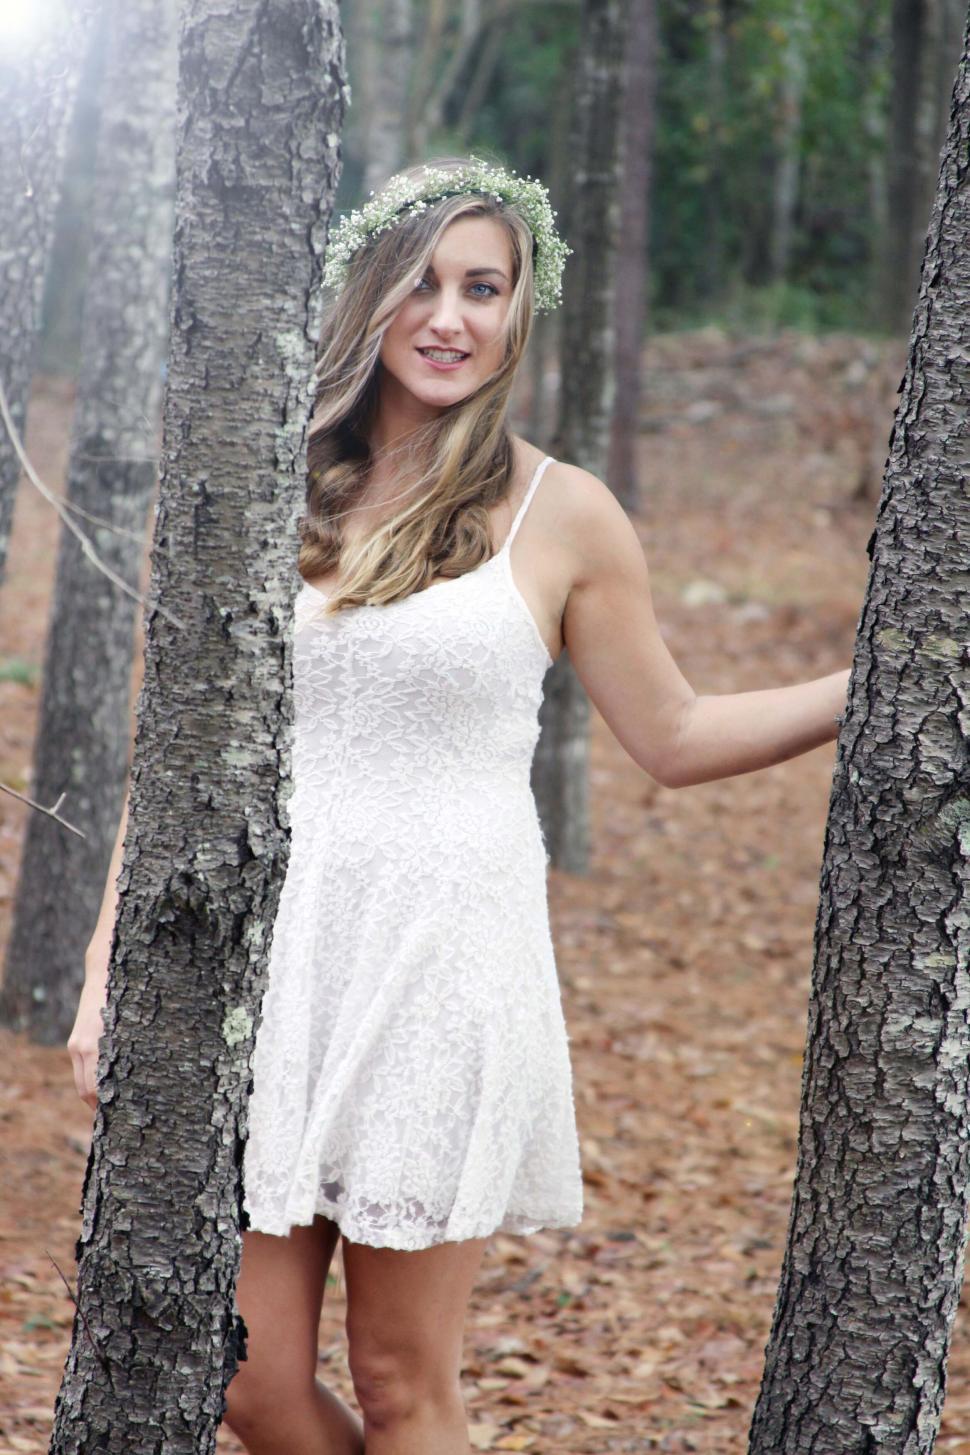 Free Image of Bride in forest with white lace dress 